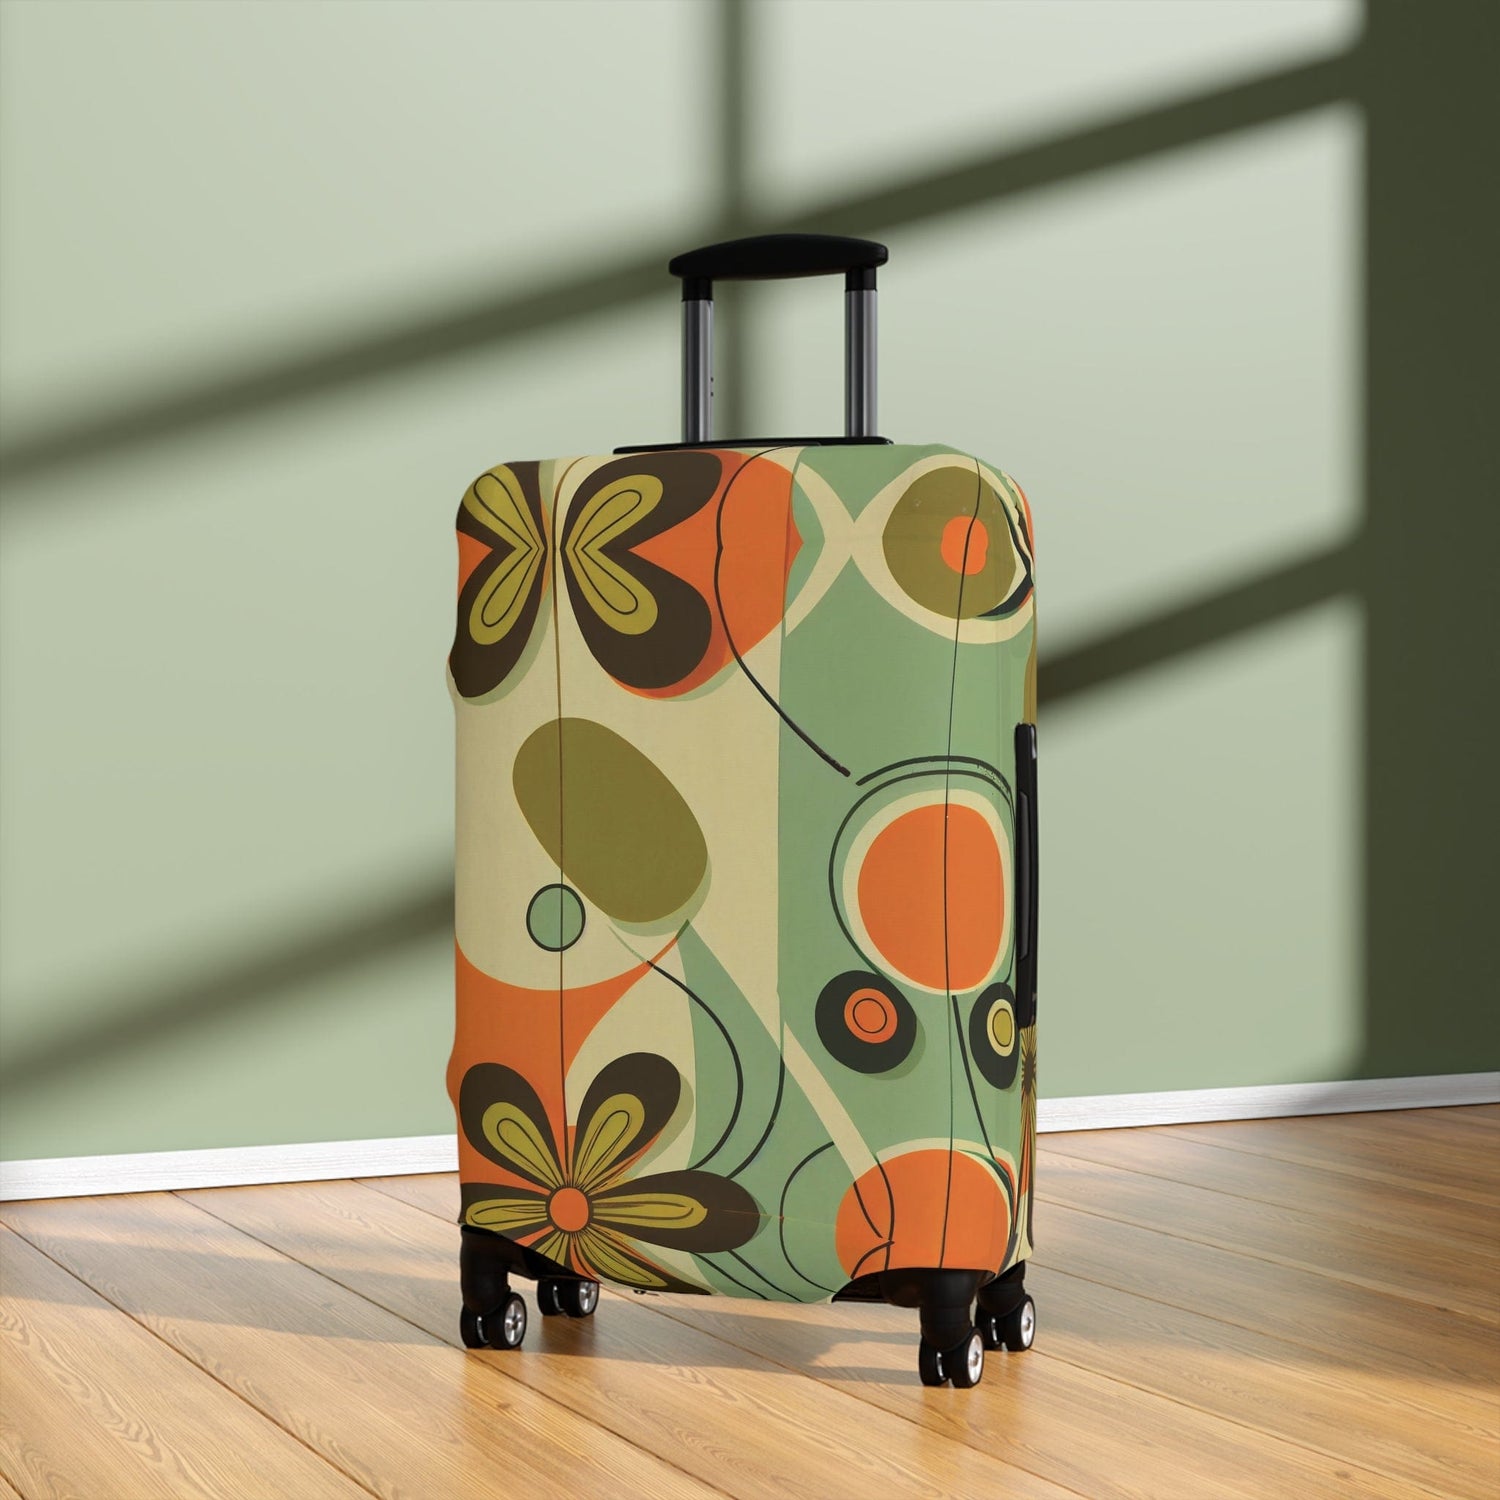 Kate McEnroe New York Retro 60s Mid Mod Daisy Luggage Cover, Mid Century Modern Groovy Hippie Suitcase protector Luggage Covers